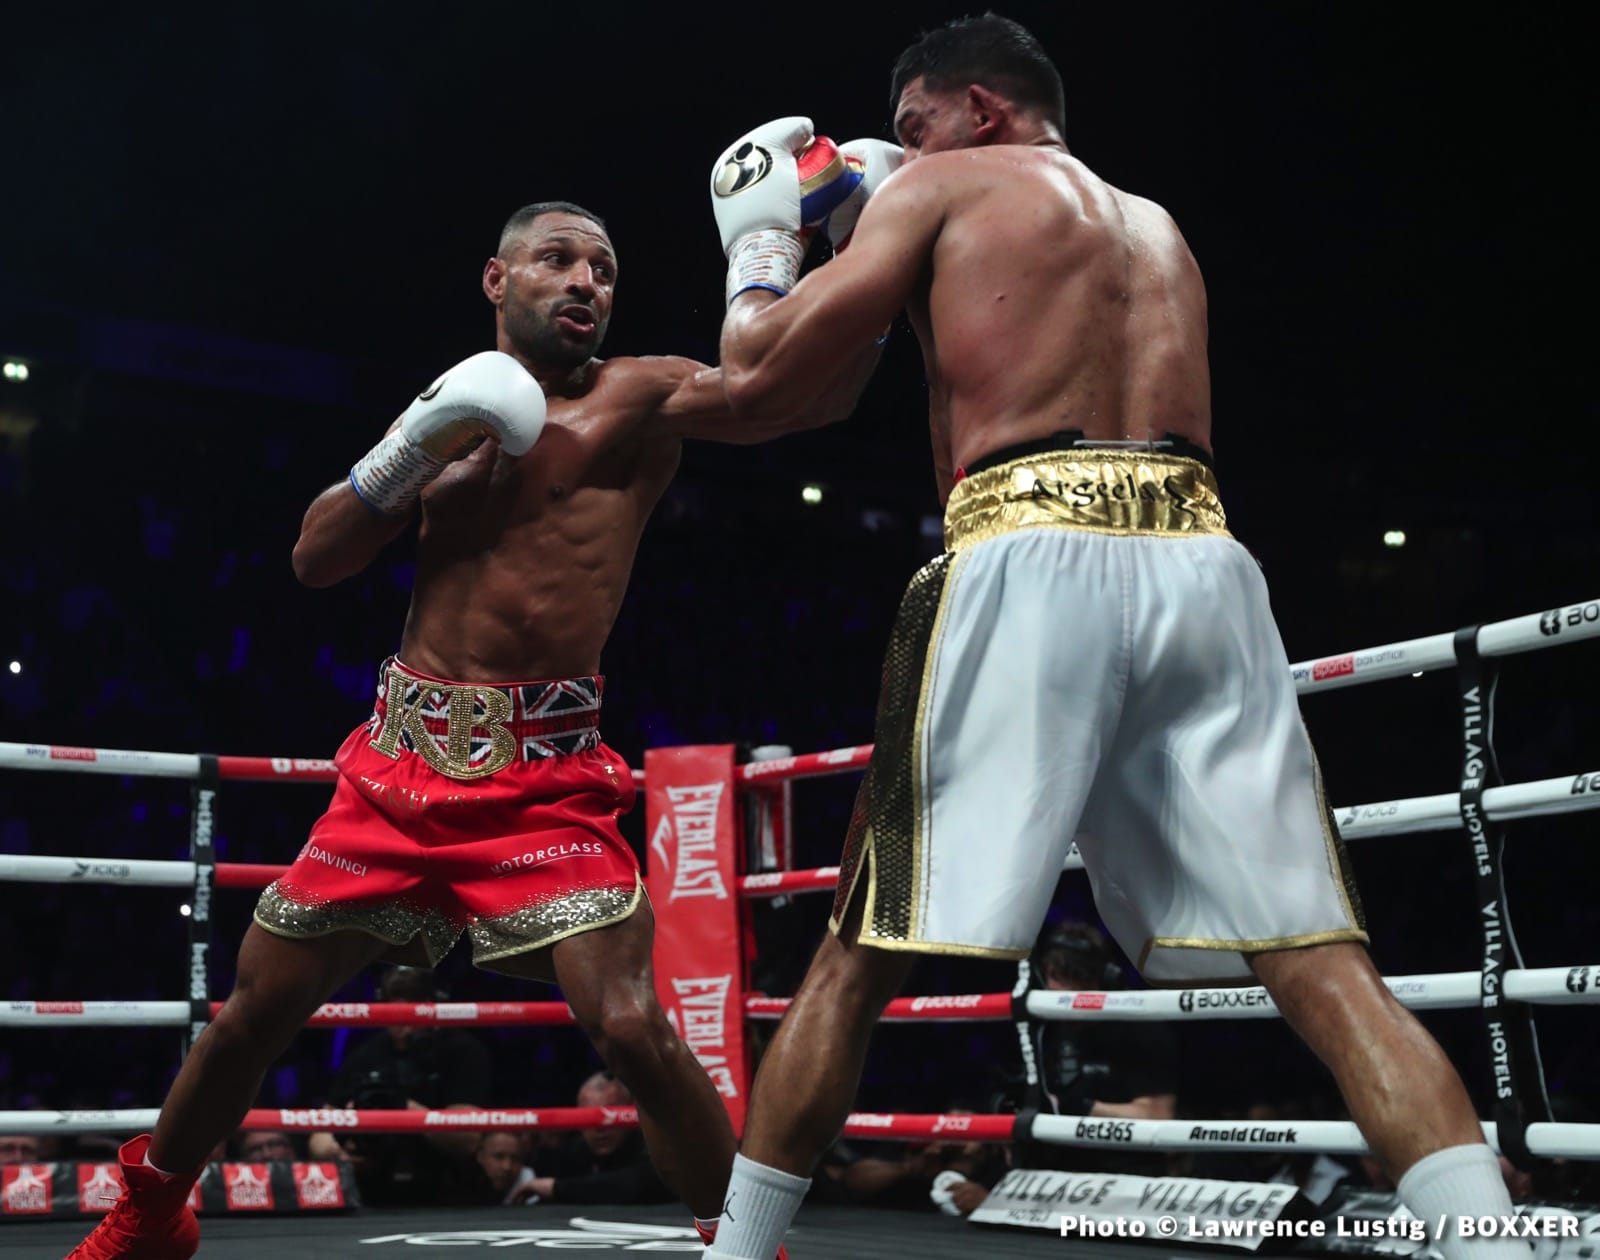 Image: Kell Brook willing to fight Amir Khan again